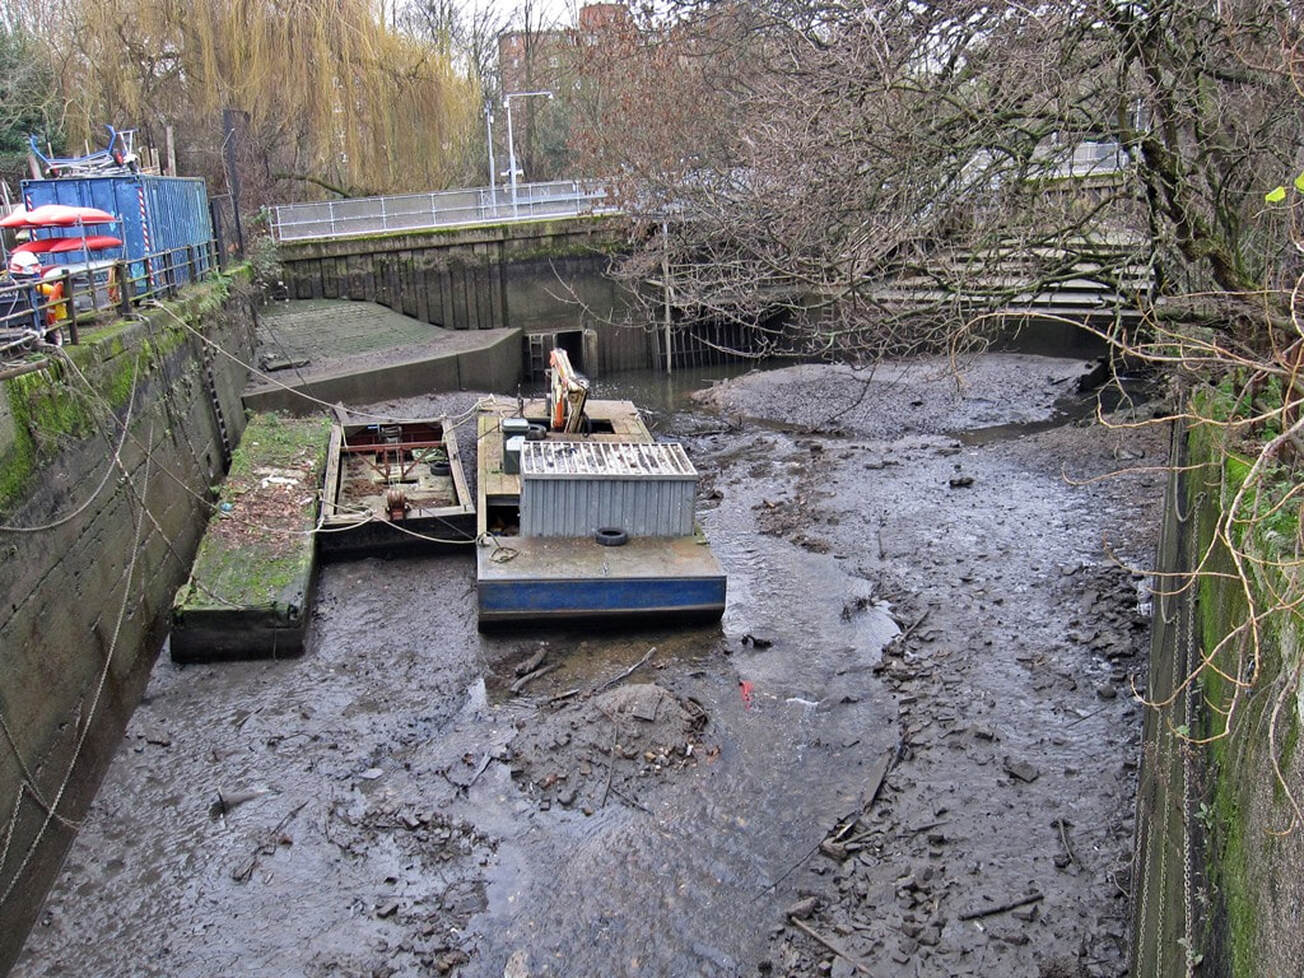 Picture of the mouth of the Beverley Brook. Sluice gates provide a flood defence from the Thames near Putney Bridge